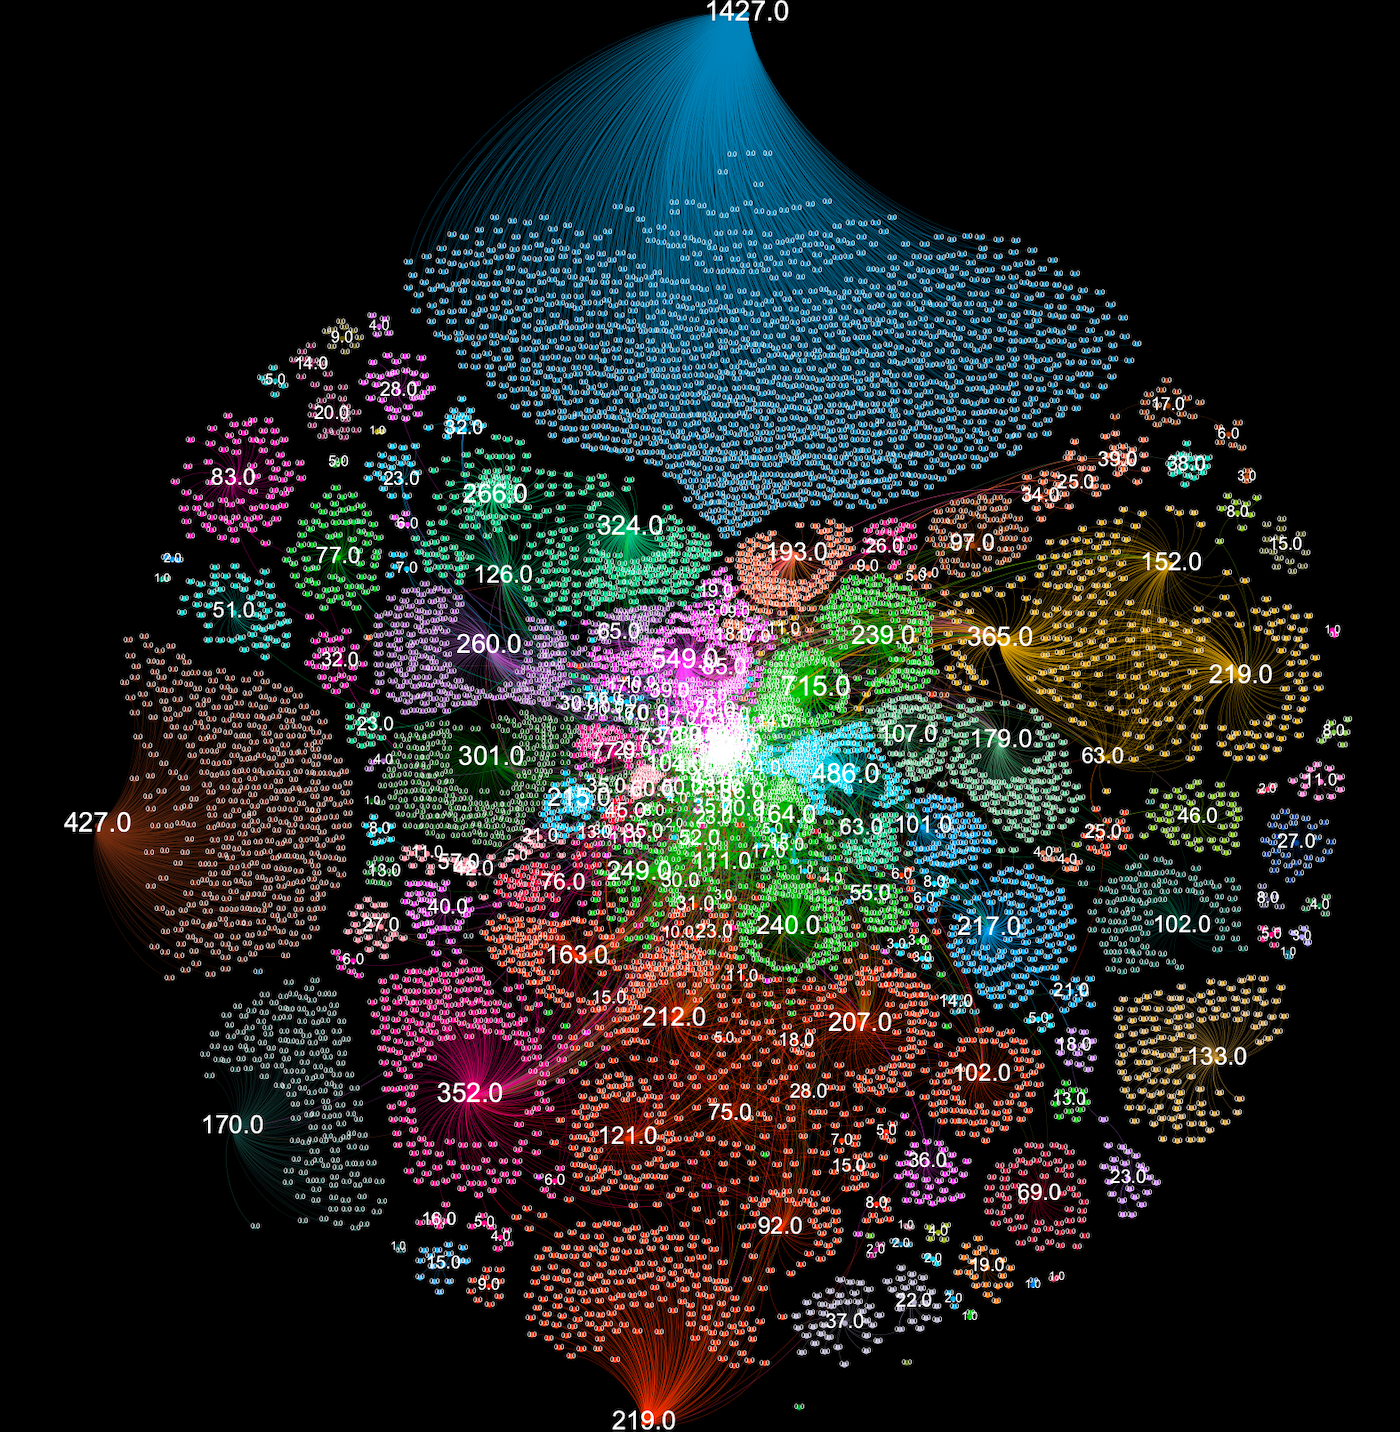 A node edge graph of cross-channel interactions captured in one of Tether's datasets, showing that many of the videos received comments from completely separate groups of accounts, with activity in the middle of the graph showing overlap between the channels. commentators.